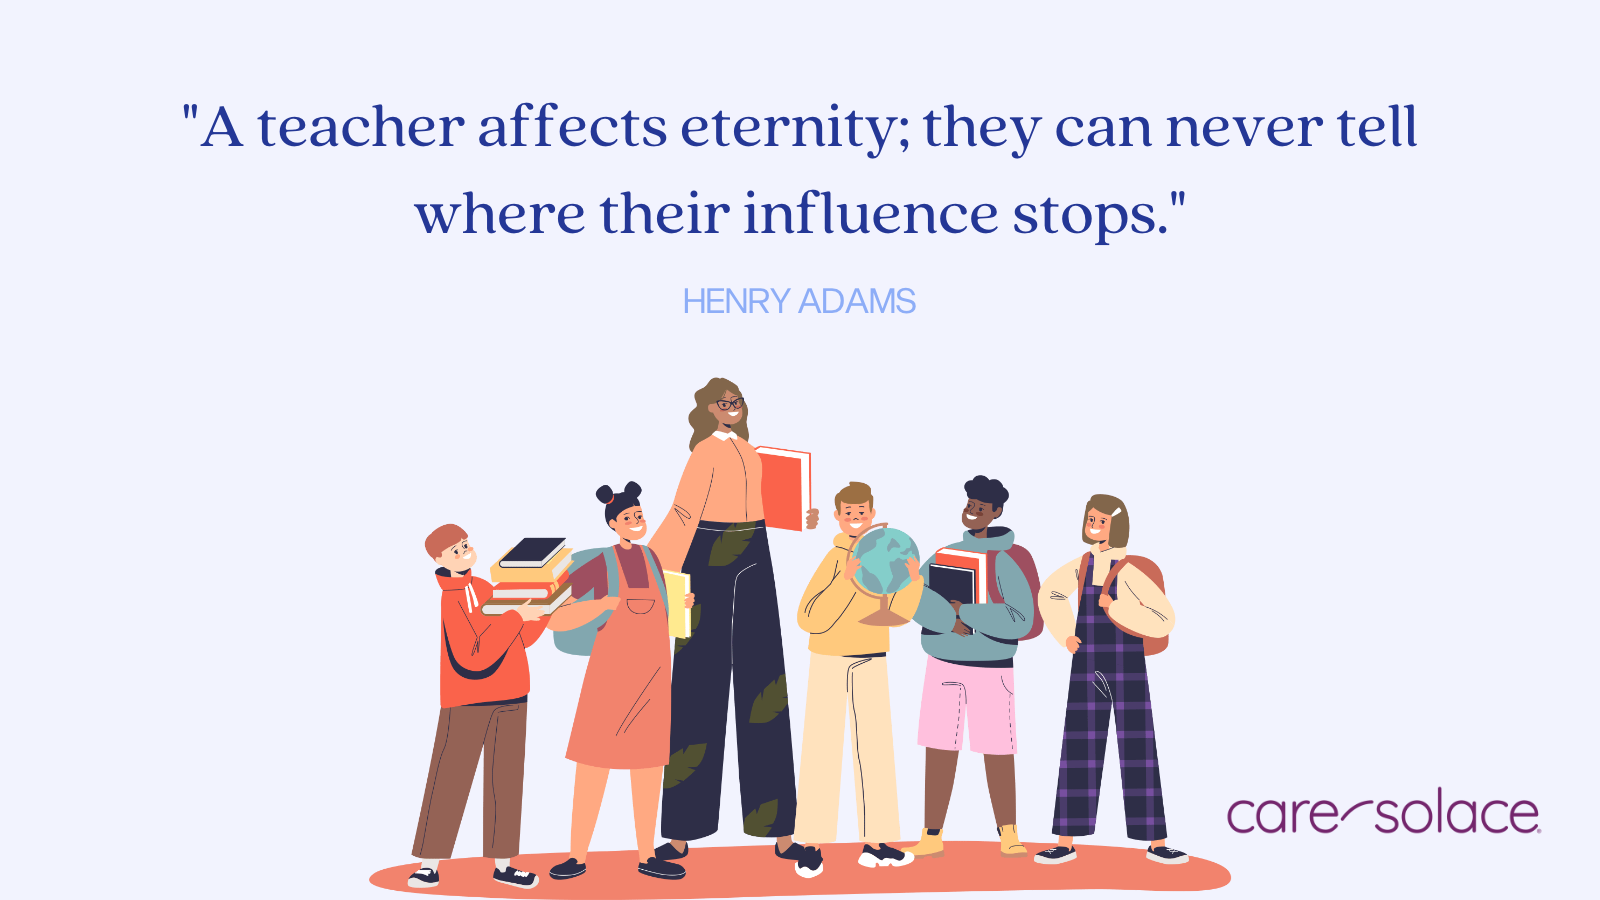 A teacher affects eternity; they can never tell where their influence stops. - Henry Adams